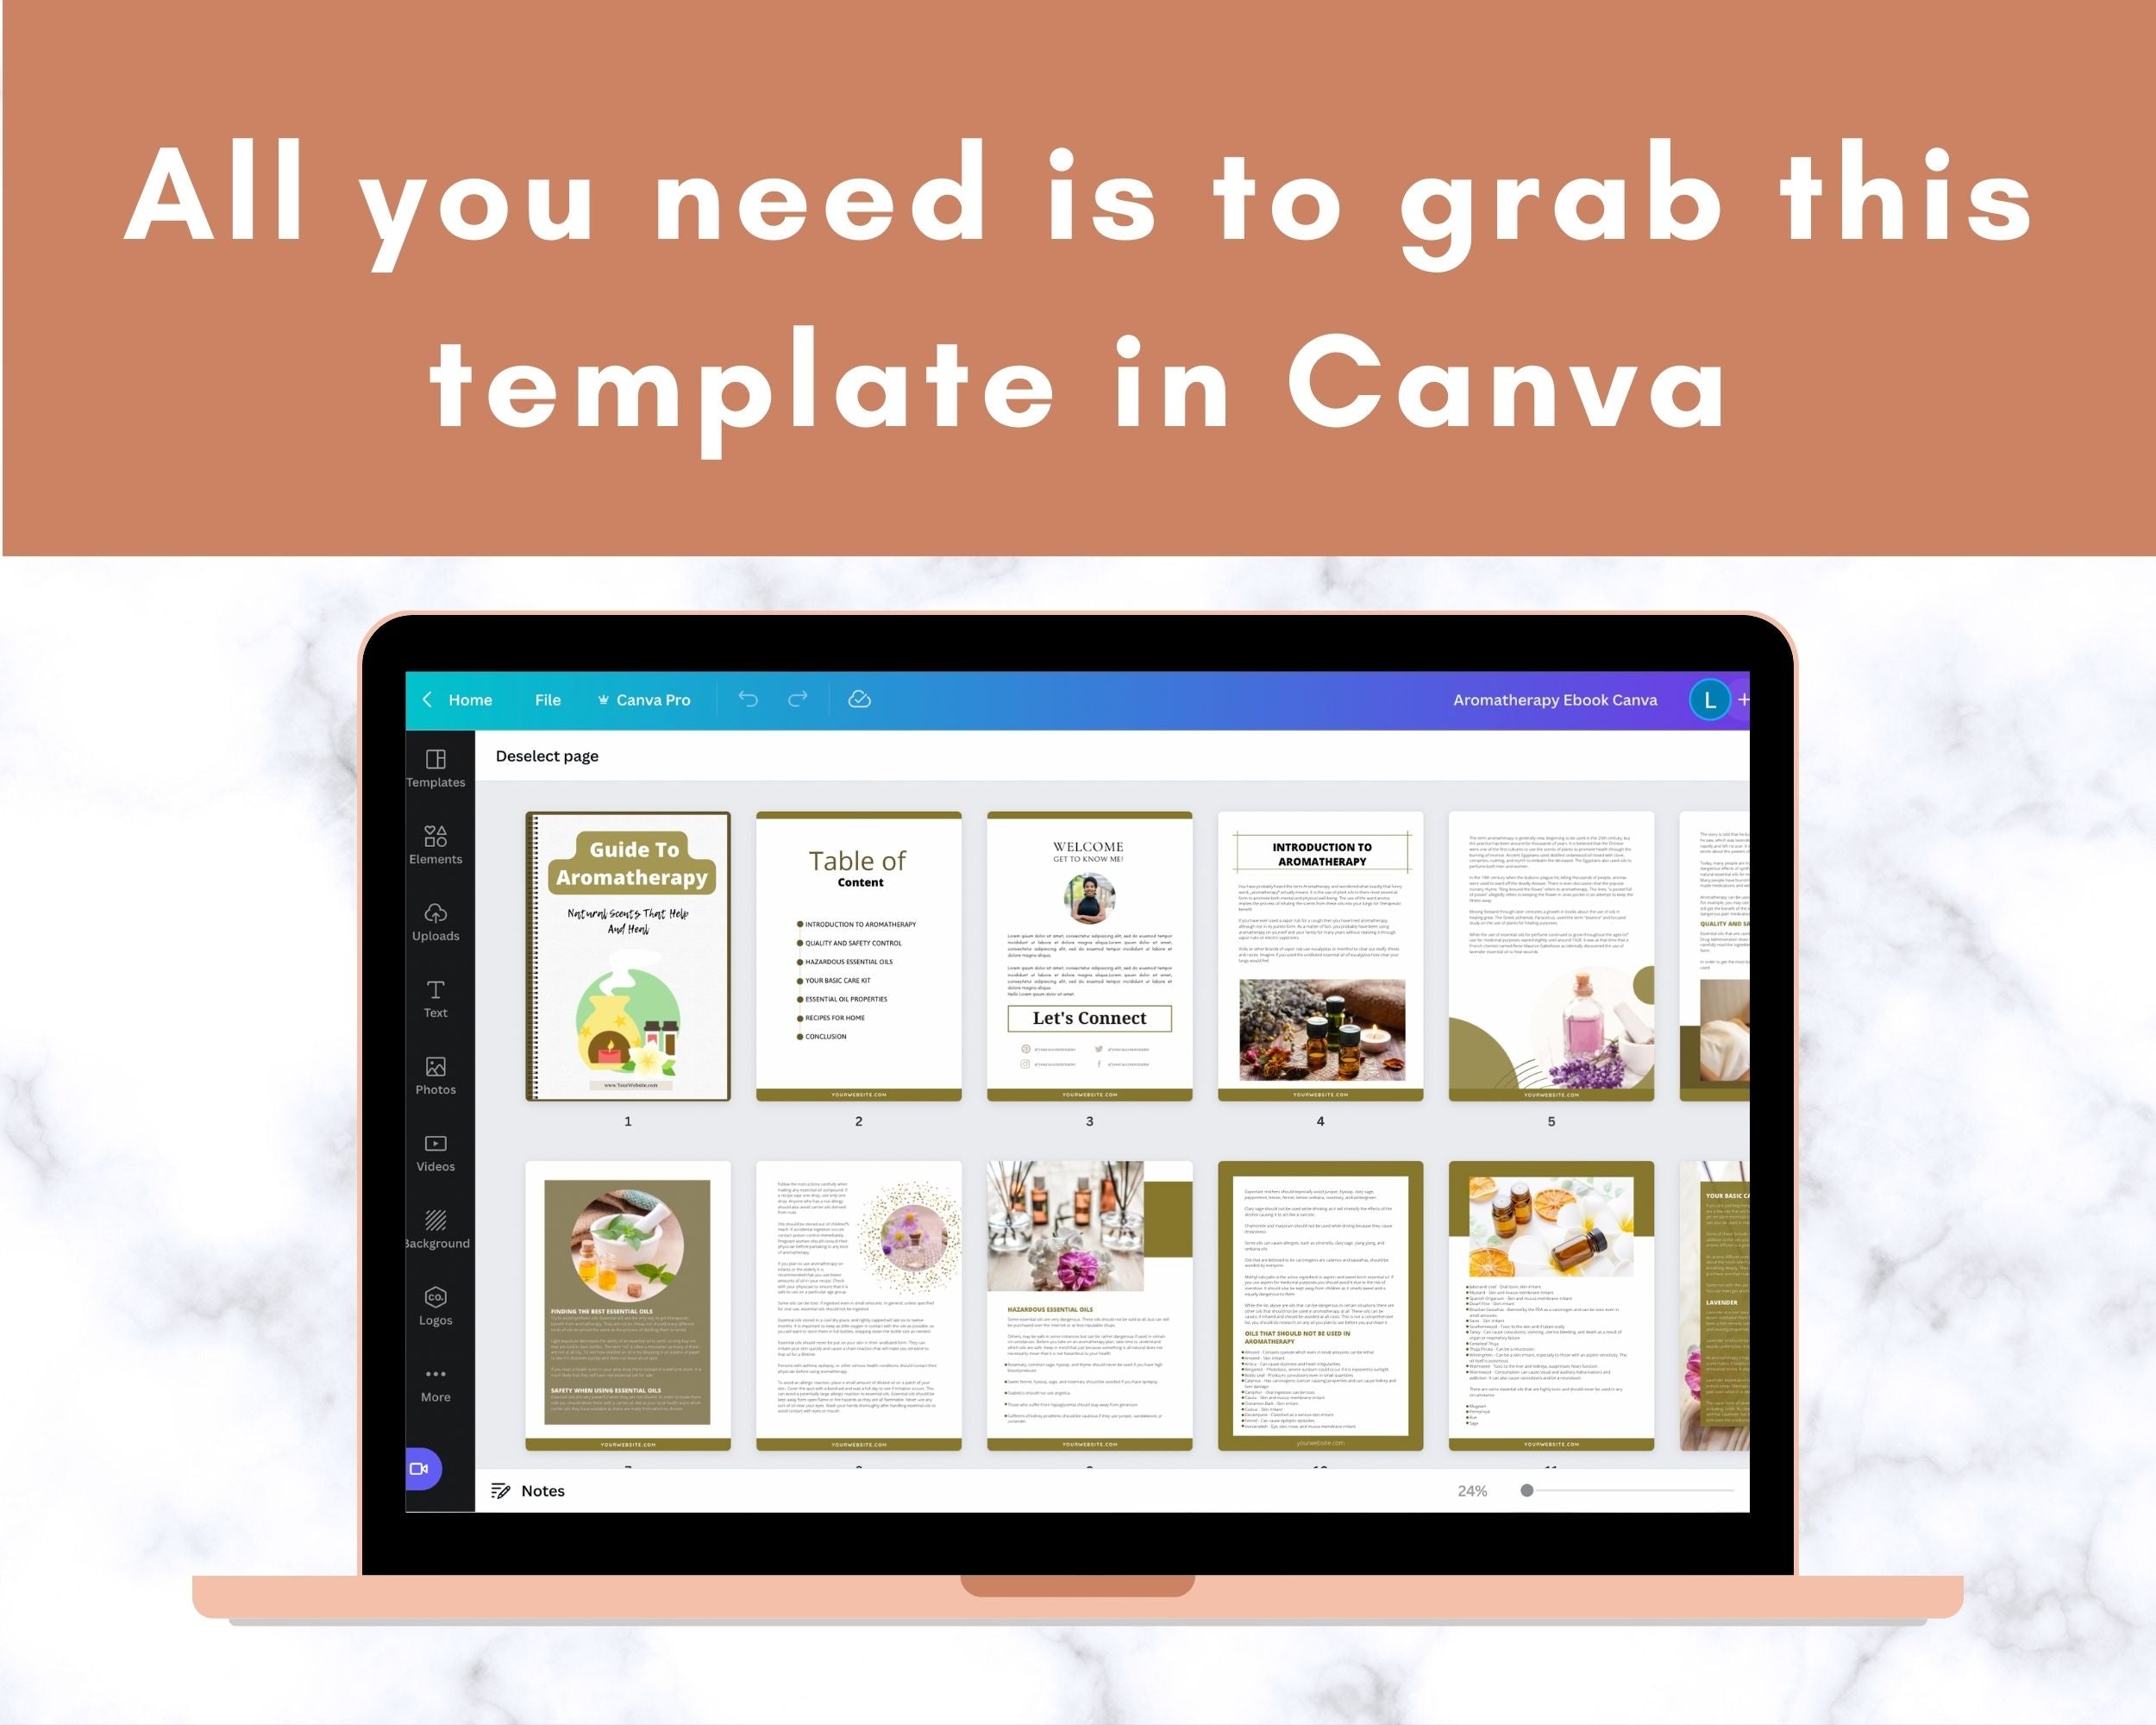 Editable Guide To Aromatherapy Ebook | Done-for-You Ebook in Canva | Rebrandable and Resizable Canva Template